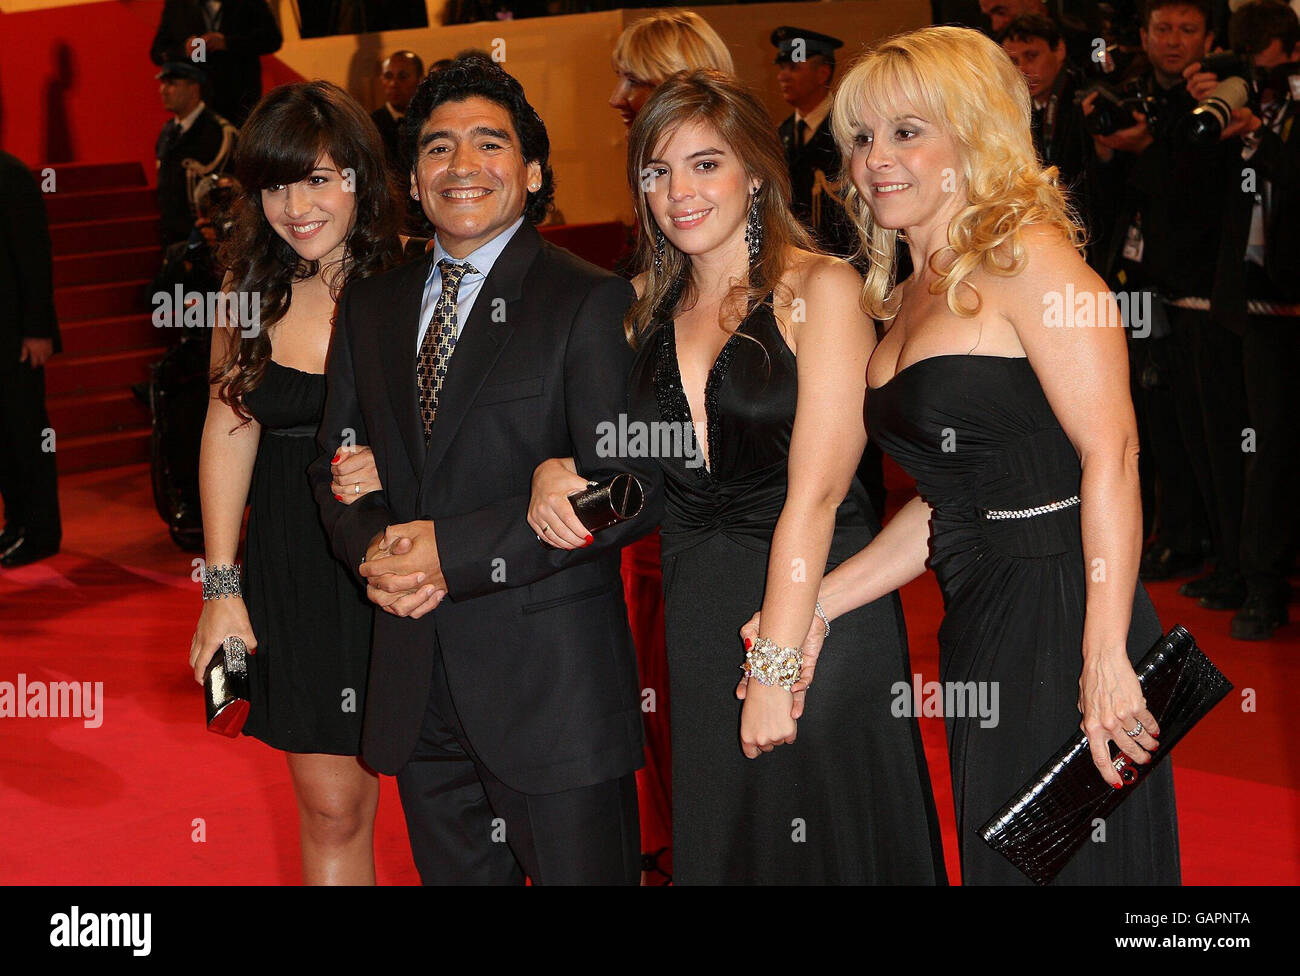 AP OUT. Maradona and his family arrive for the screening of 'Maradona' by Emir Kusturica during the 61st Cannes Film Festival in France. Stock Photo